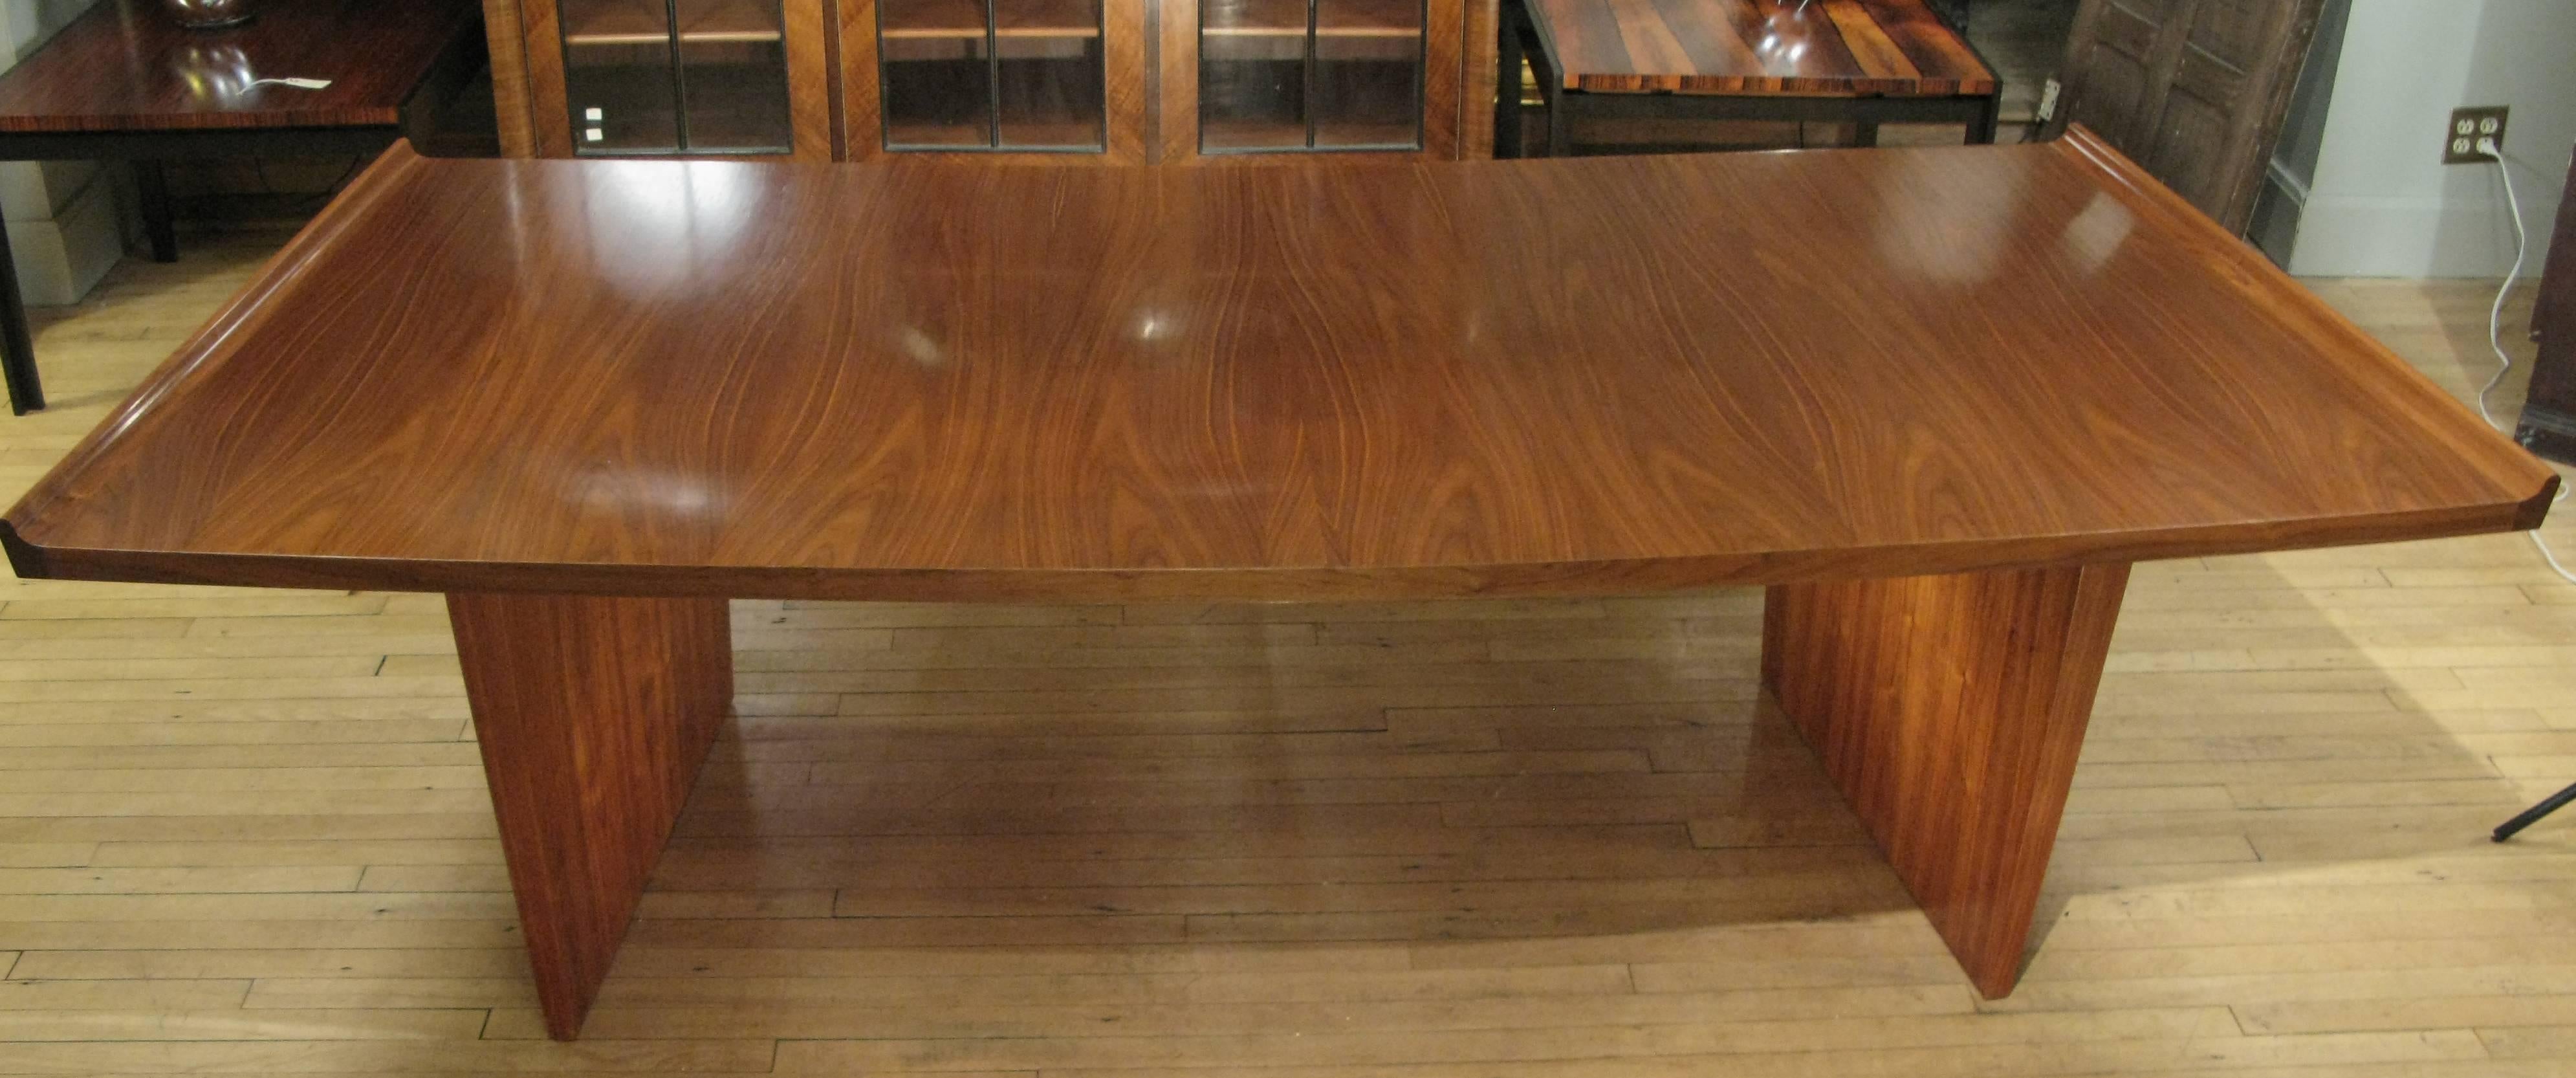 A beautiful vintage 1950s curved walnut executive desk by Harvey Probber, with a beautiful large curved top and tapered bases, with very nice details including raised edges on both sides and a pair of slim drawers. Beautifully restored.